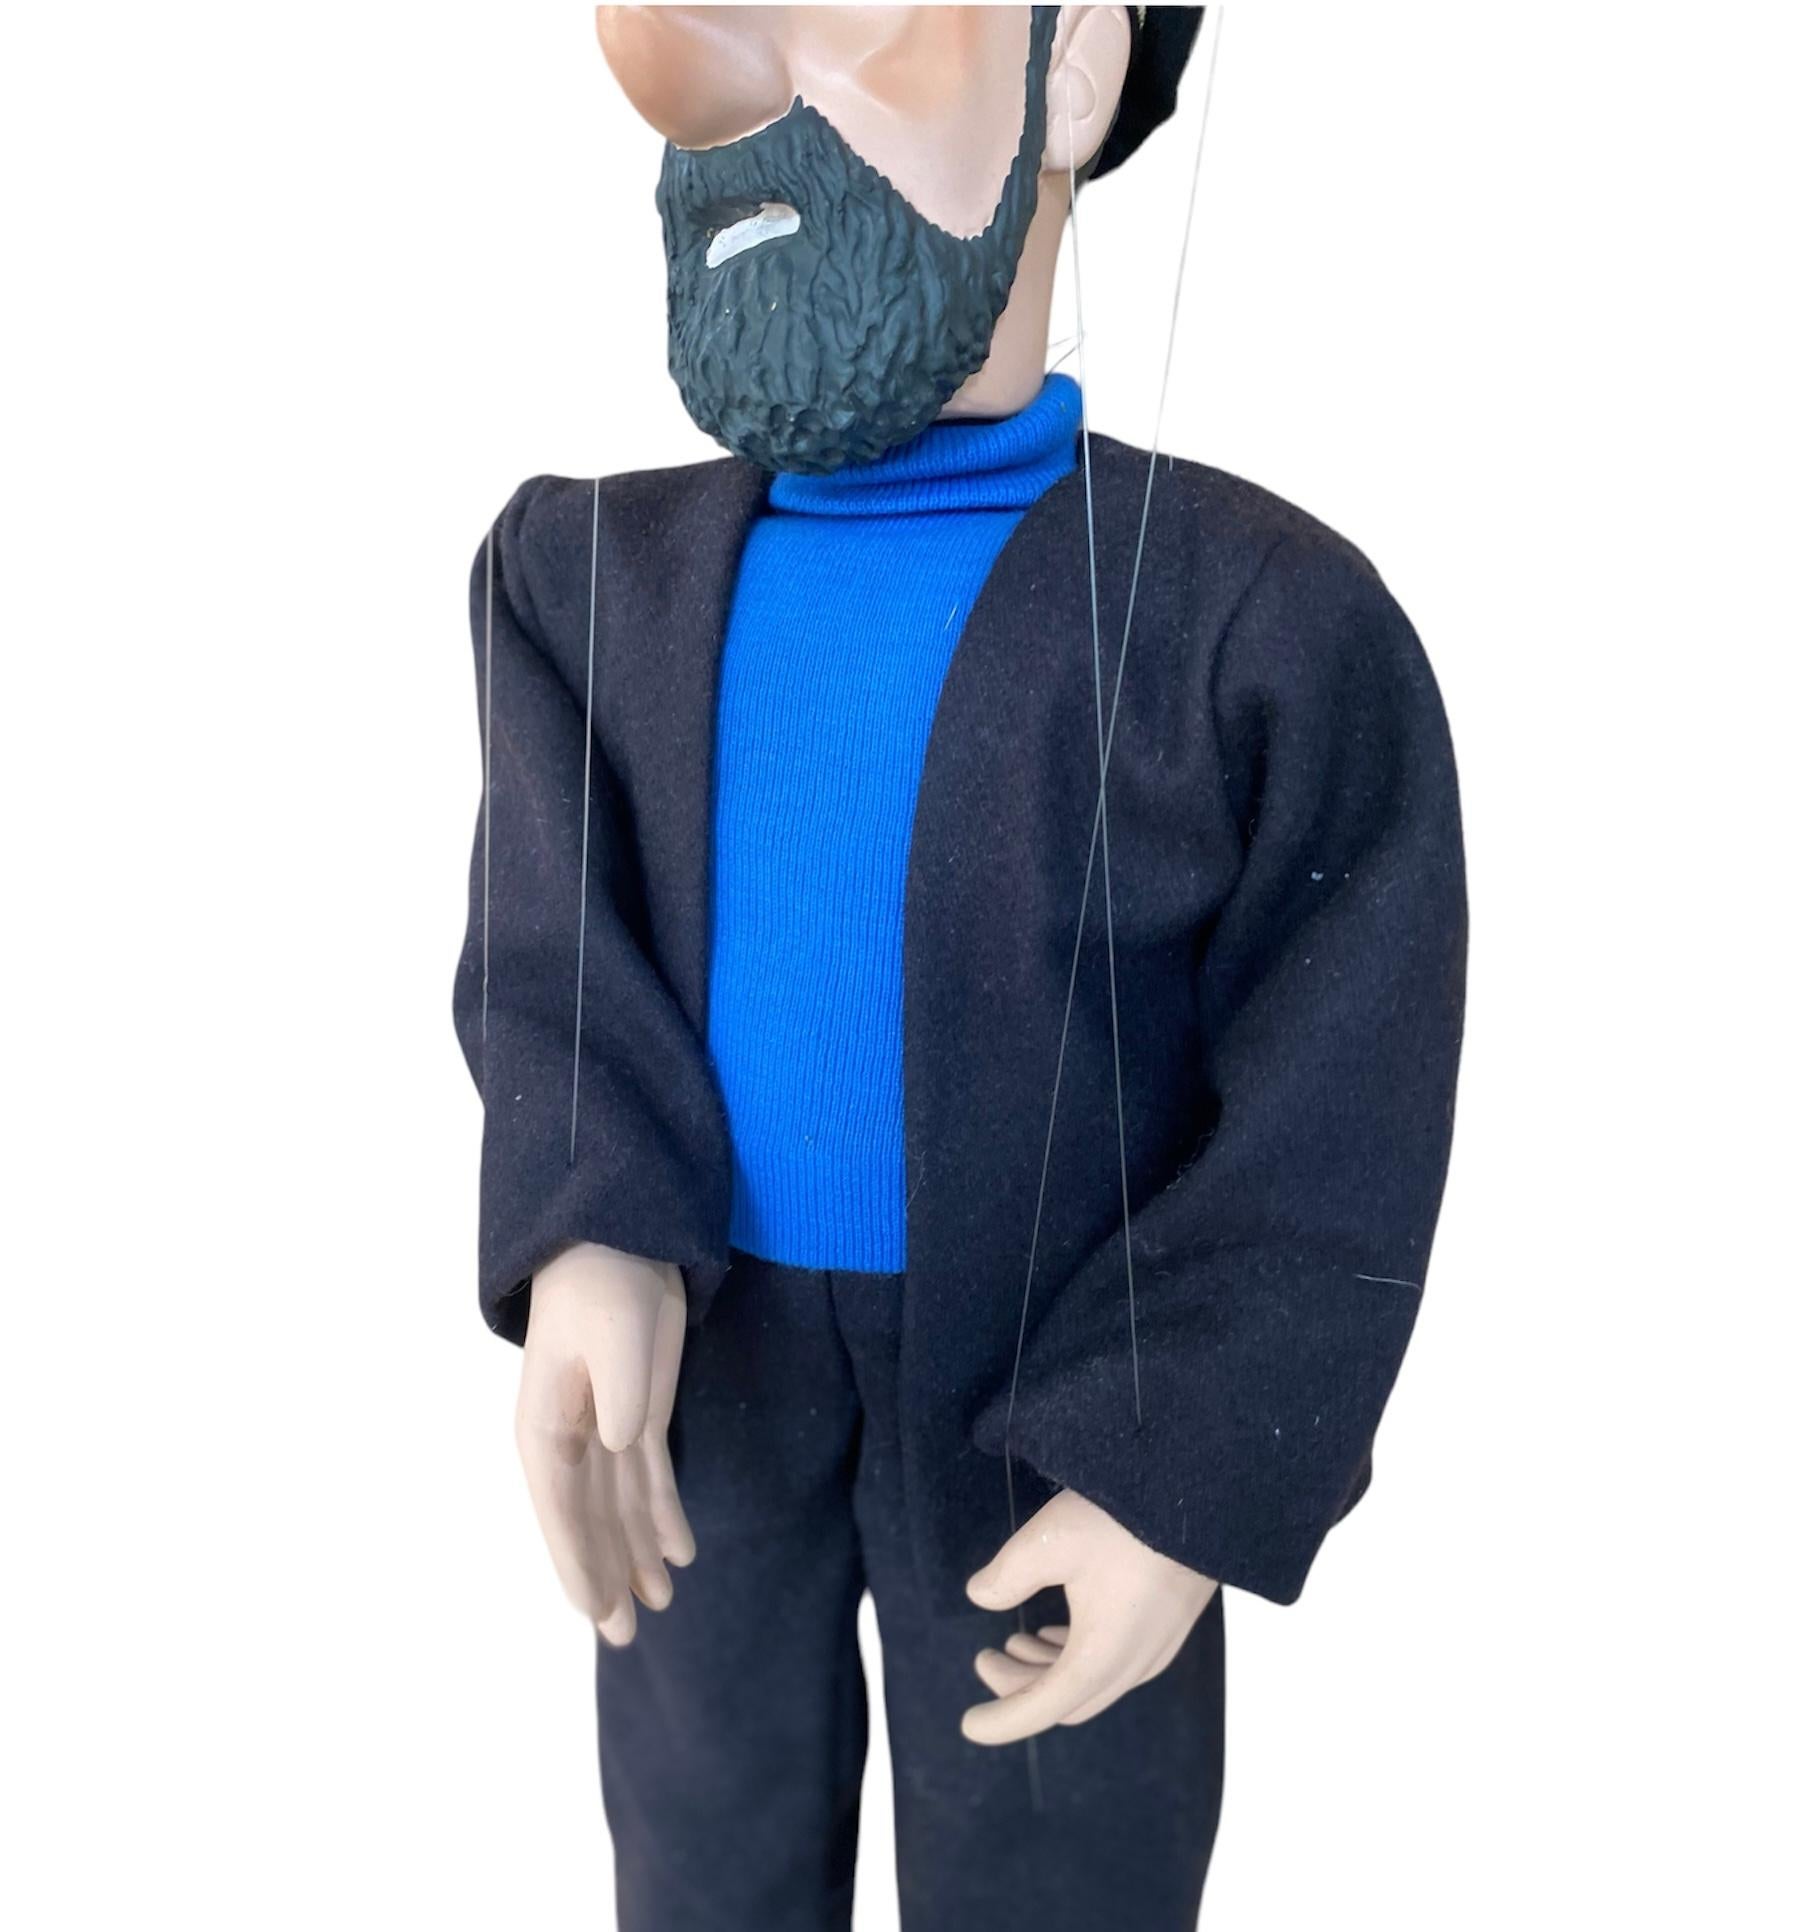 Very Rare Captain Haddock Puppet Hergé, Georges Remi For Sale 2